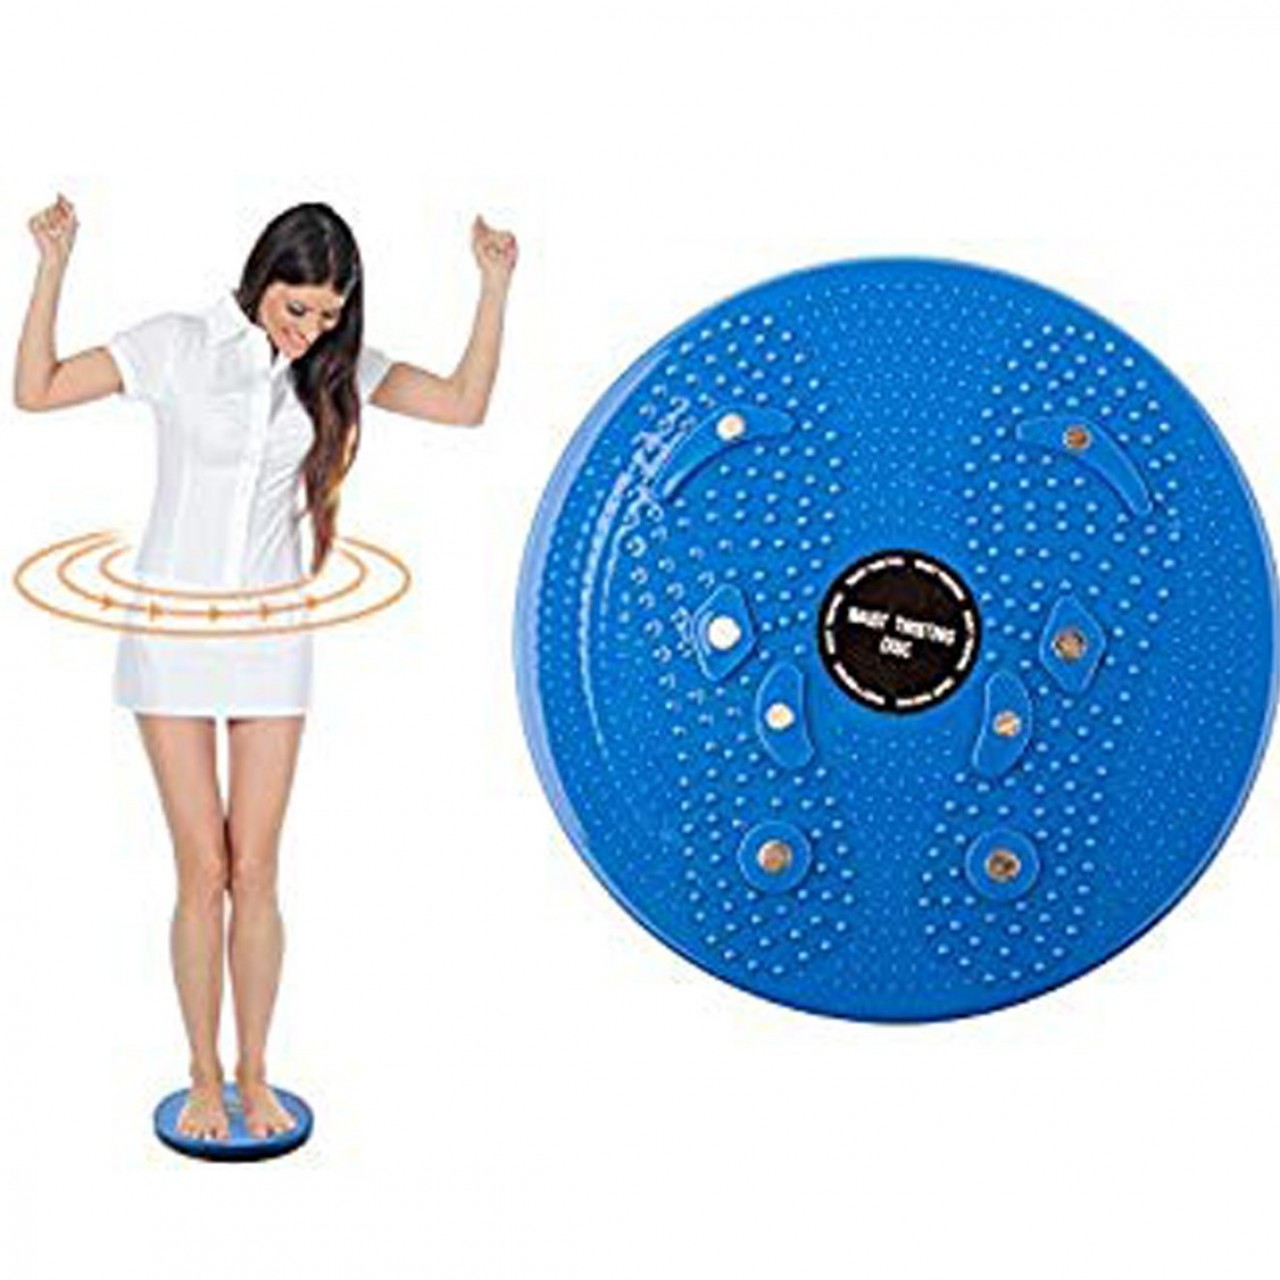 AB Twist Board For Losing Weight